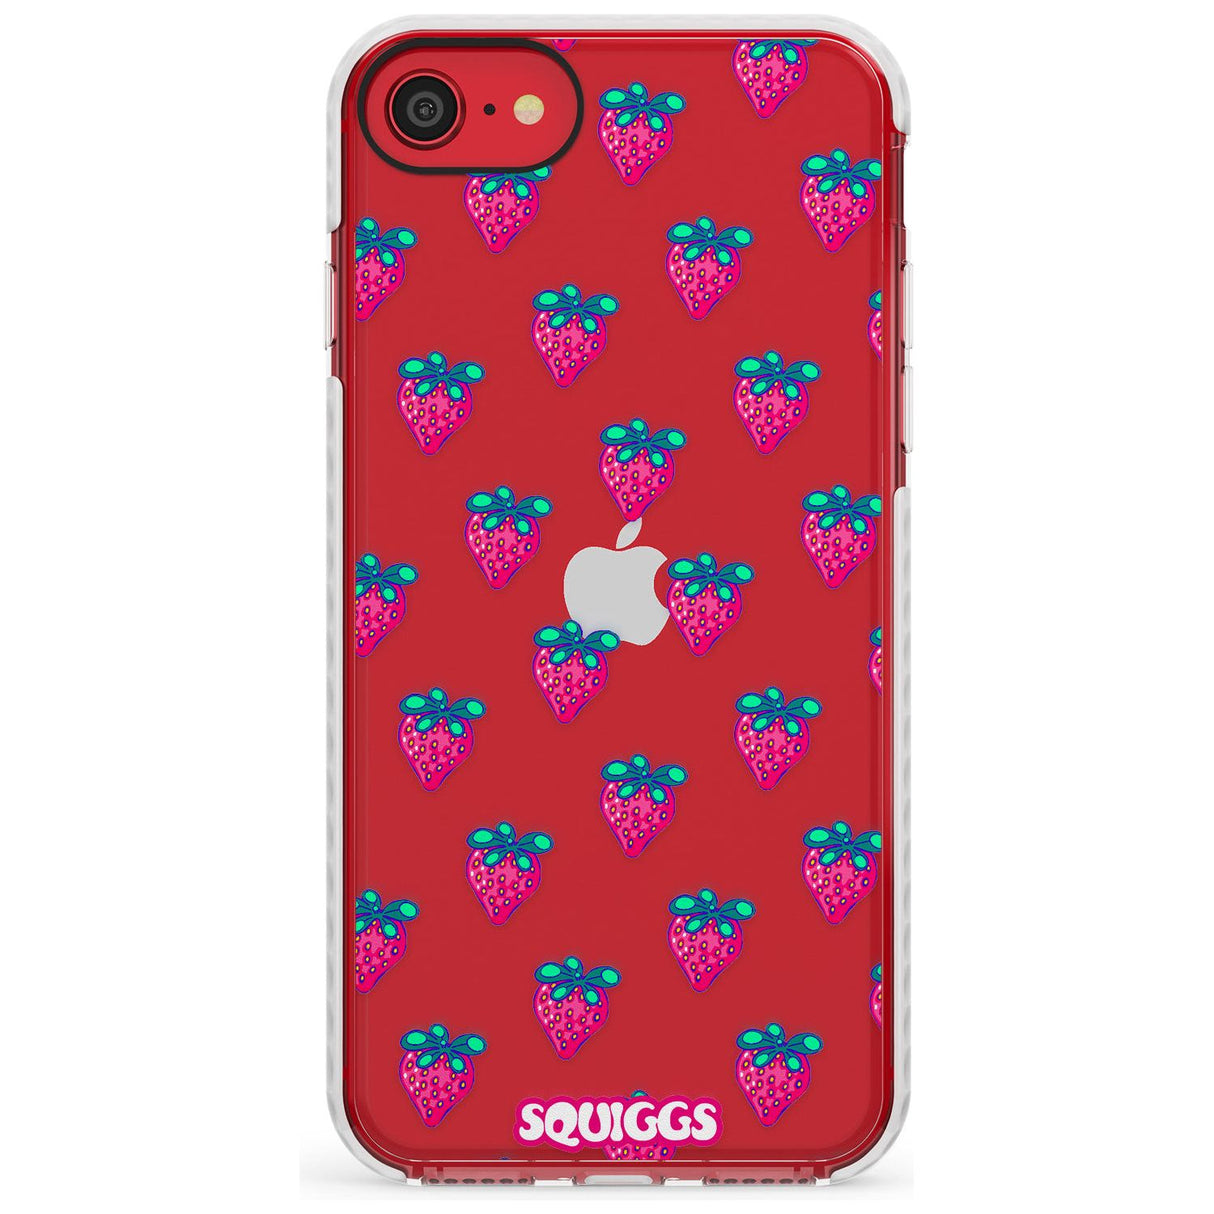 Strawberry Patch Slim TPU Phone Case for iPhone SE 8 7 Plus